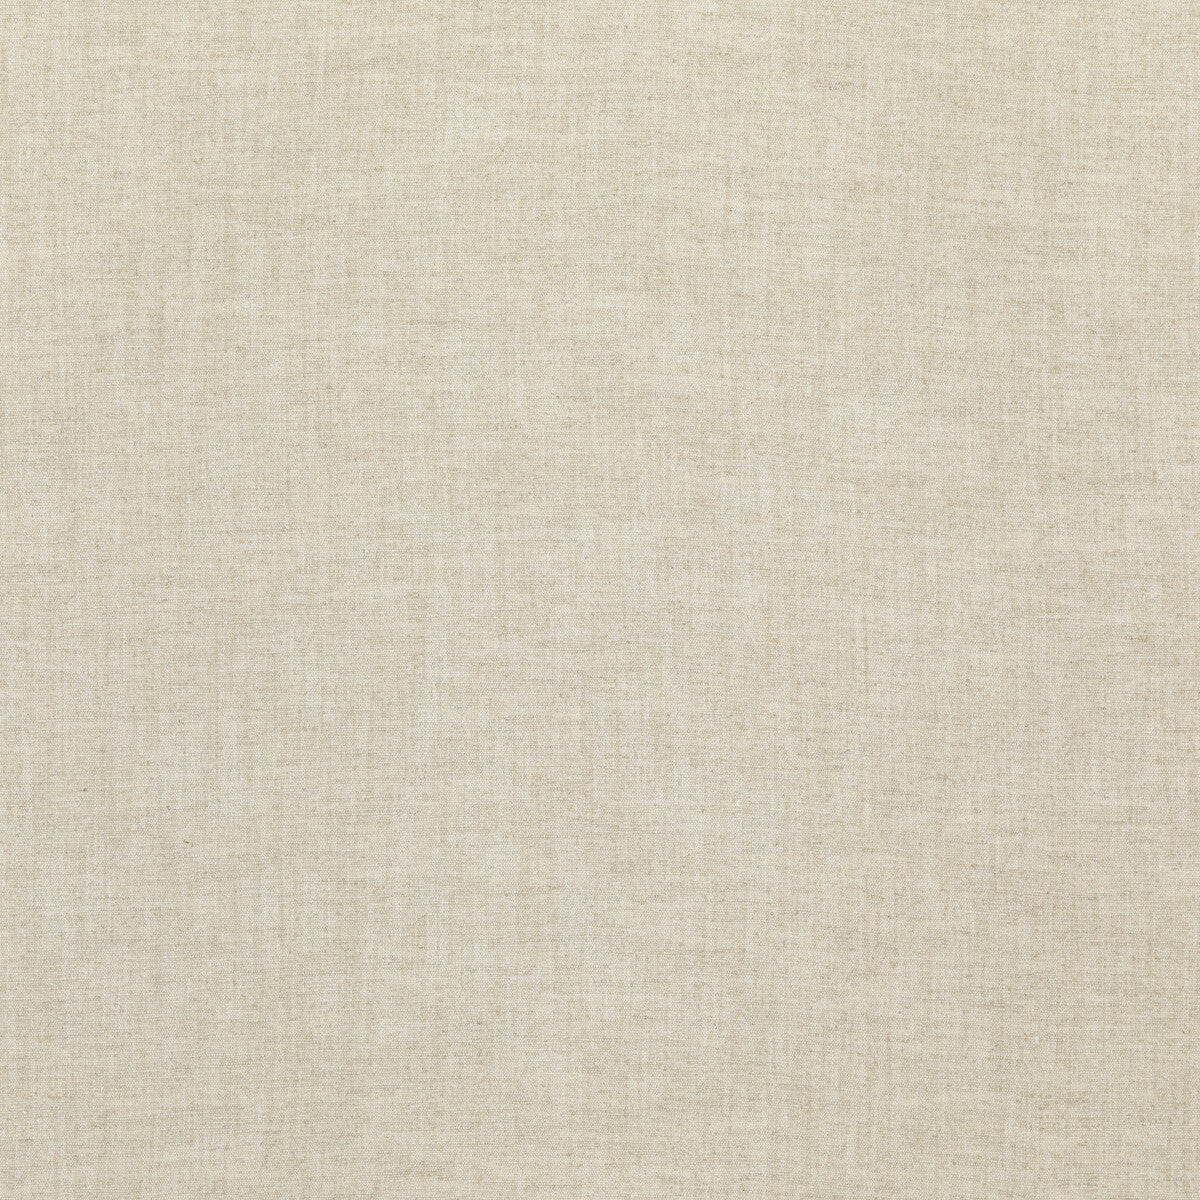 Ambrose fabric in parchment color - pattern ED85299.225.0 - by Threads in the Luxury Weaves collection